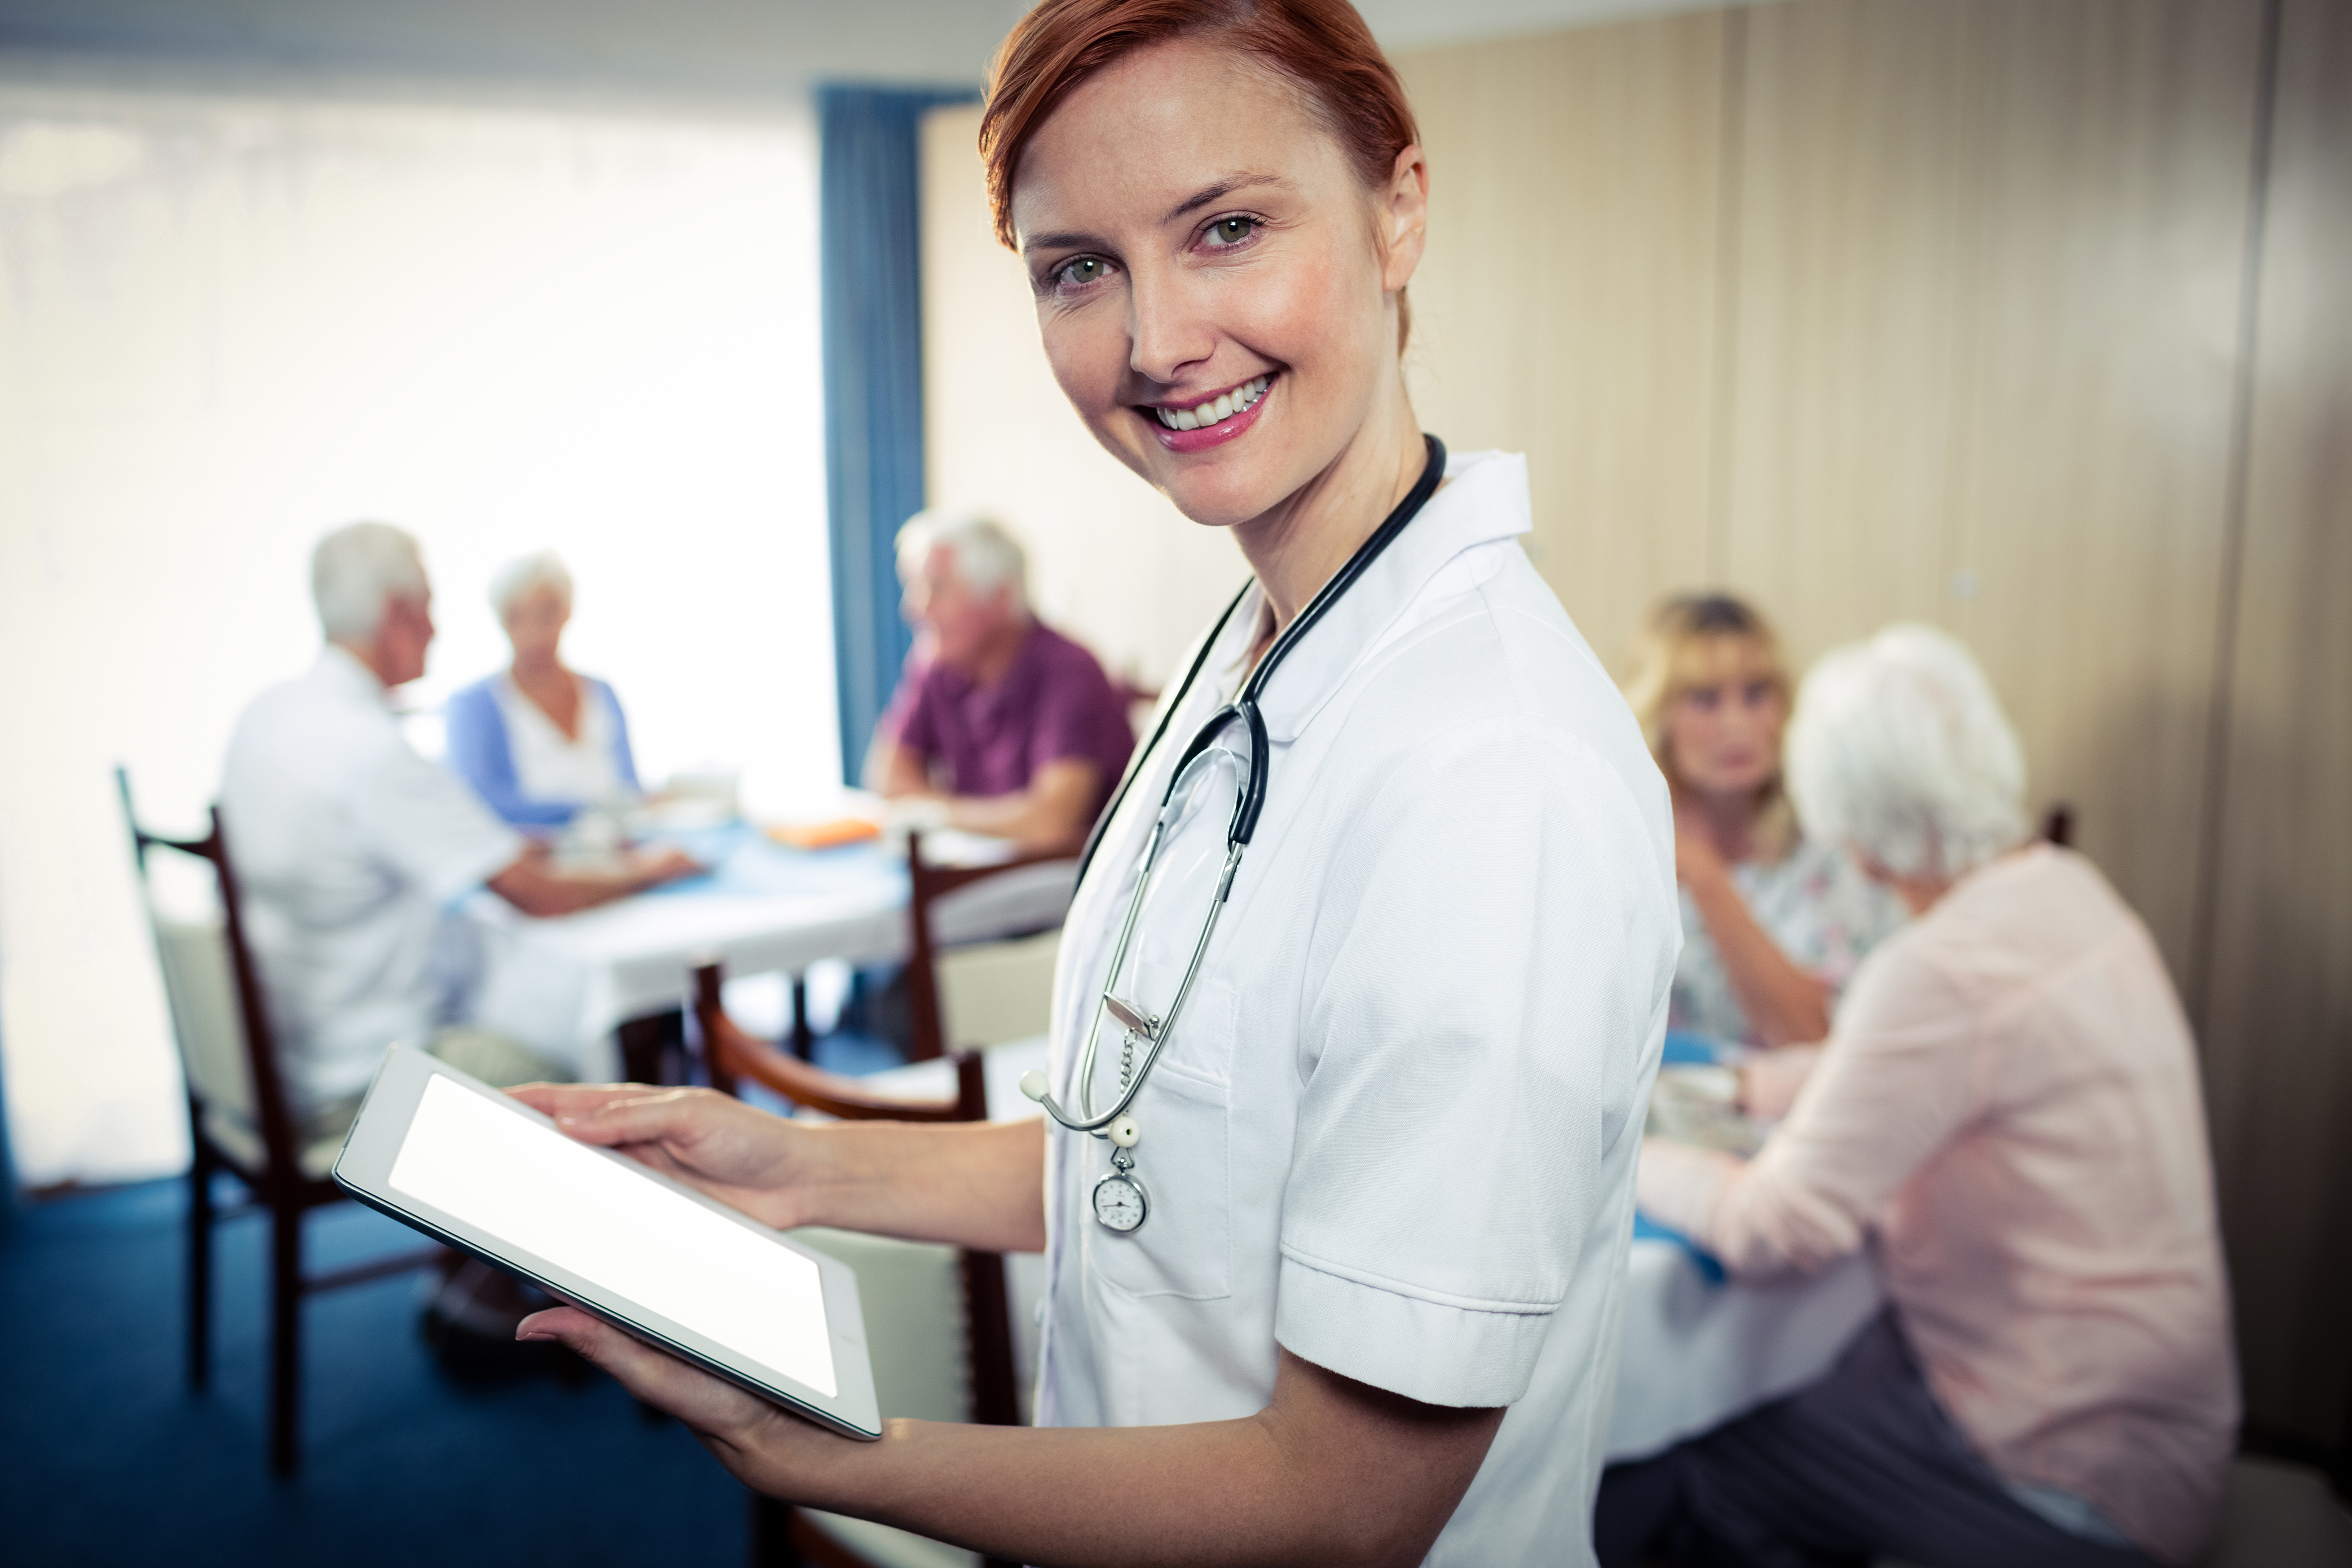 National reform program calls for new requirements for the aged care sector